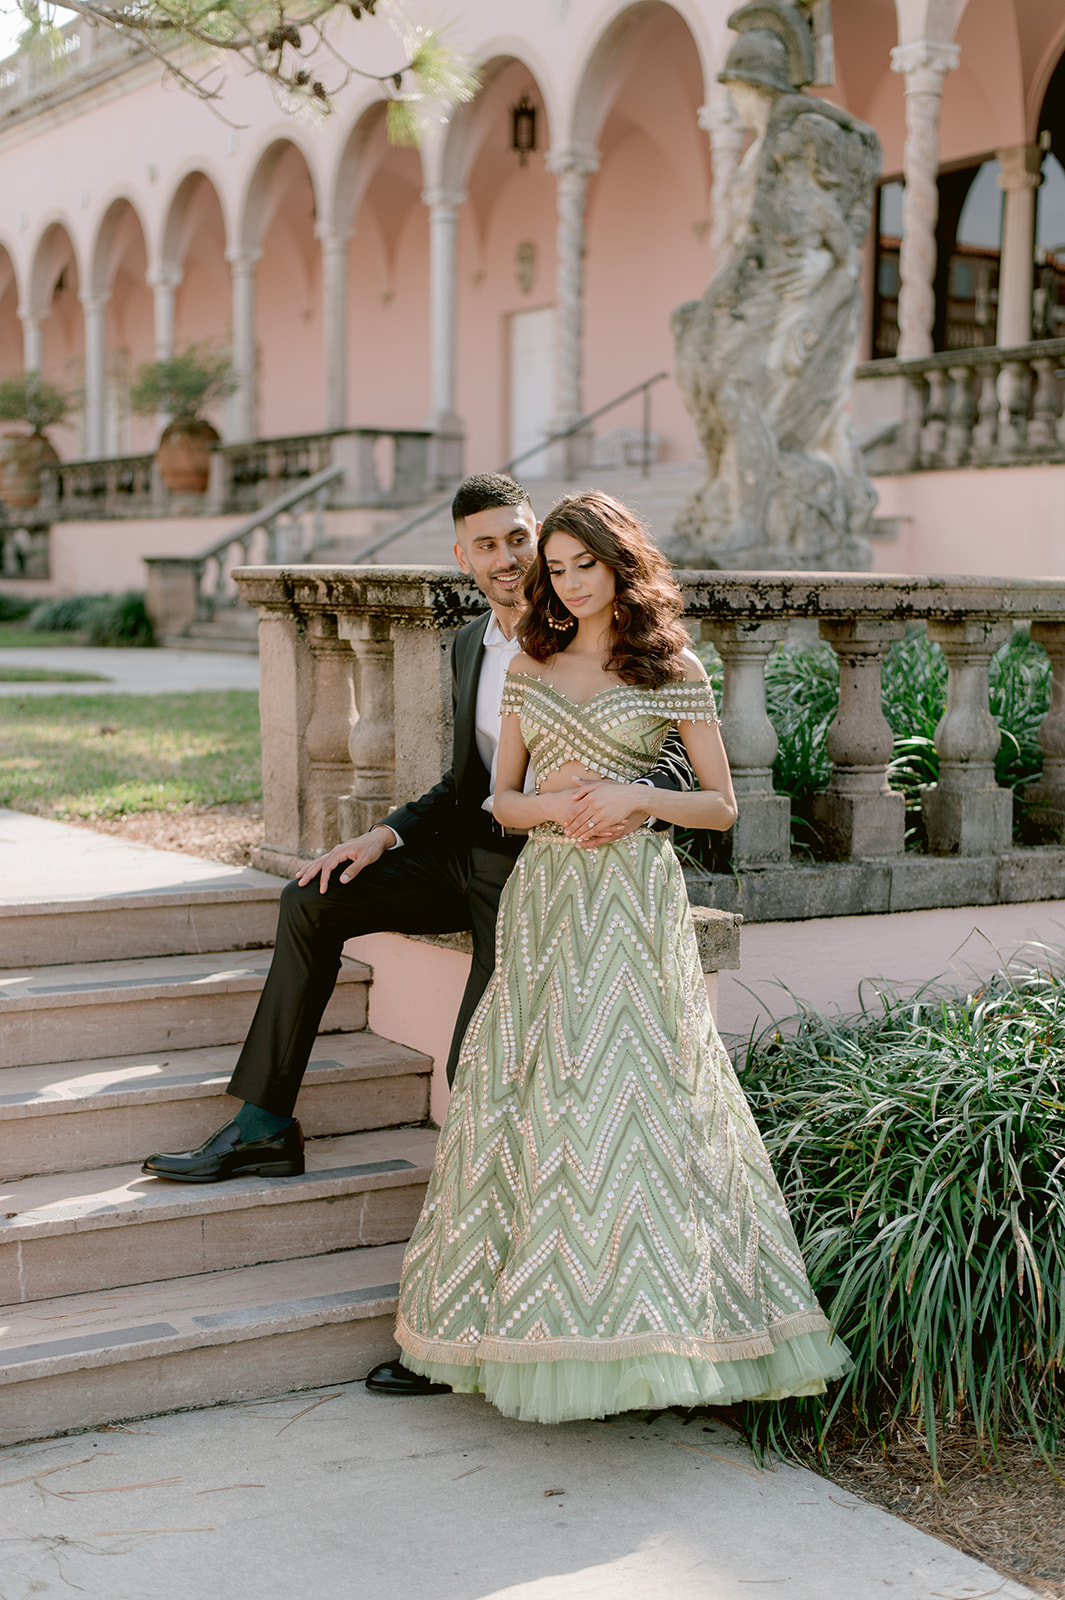 "John and Mable Ringling Museum engagement shoot with Indian couple in love"
